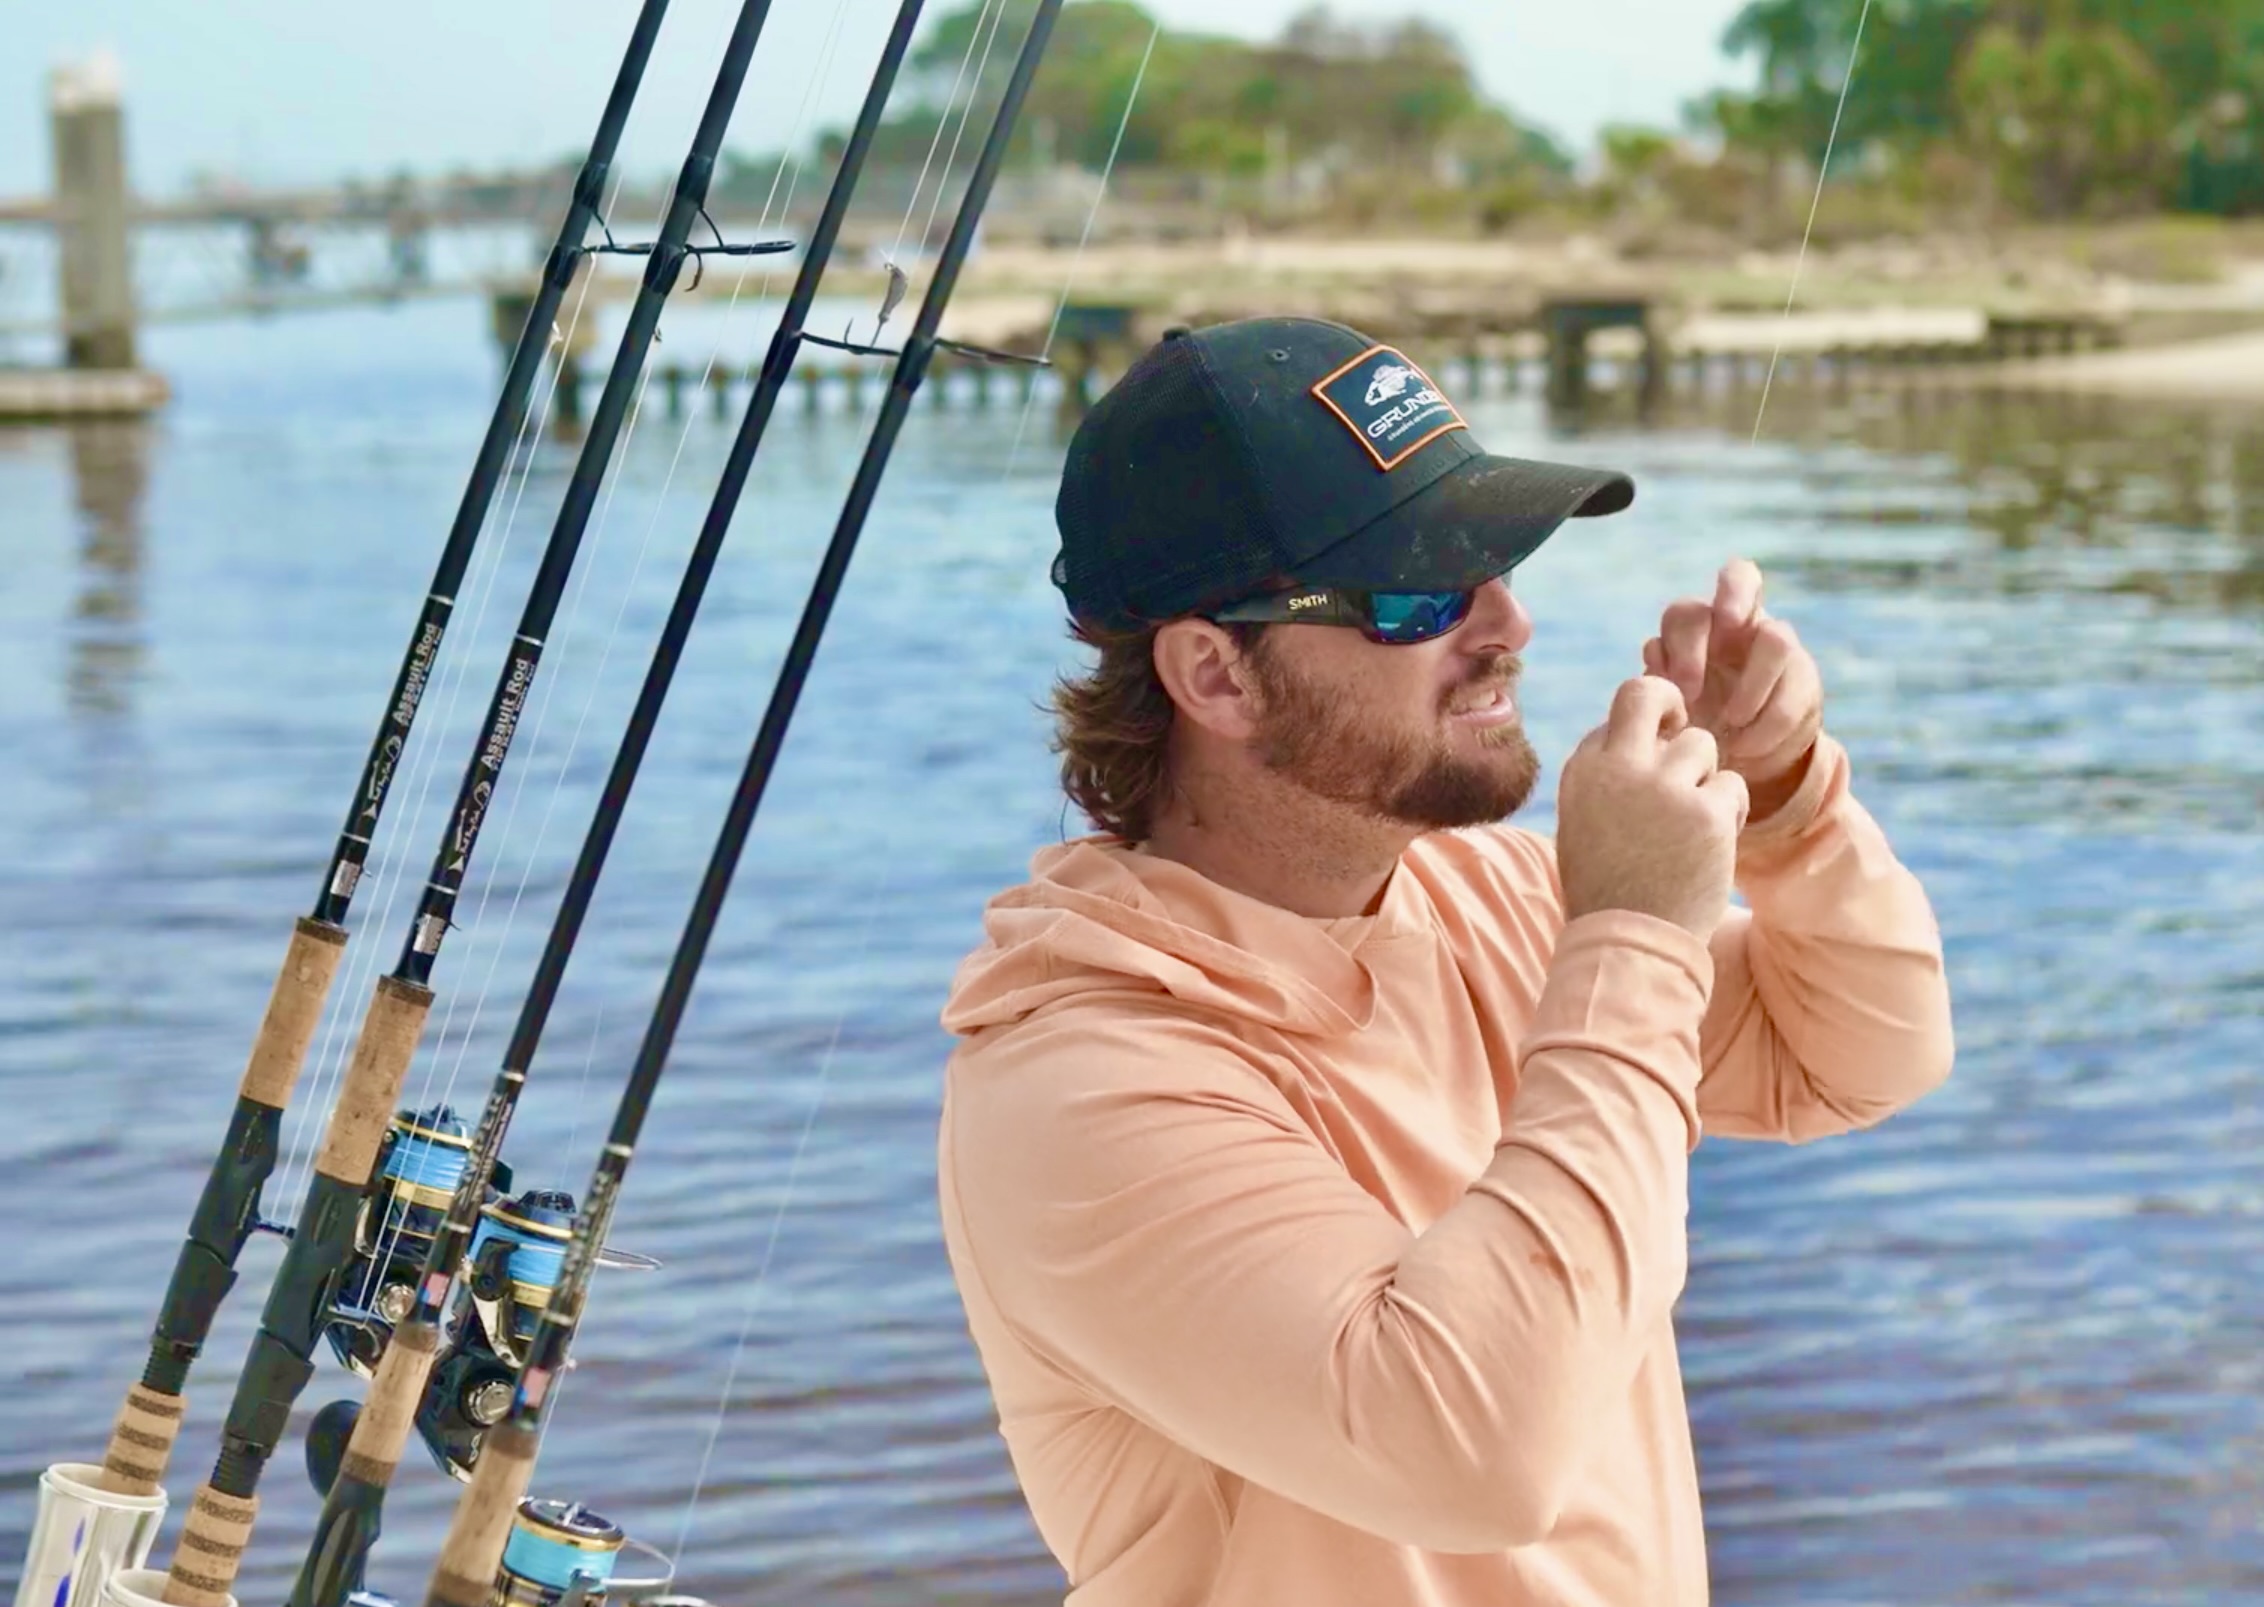 The 10 BEST Fishing Charters in St Johns River from US $425